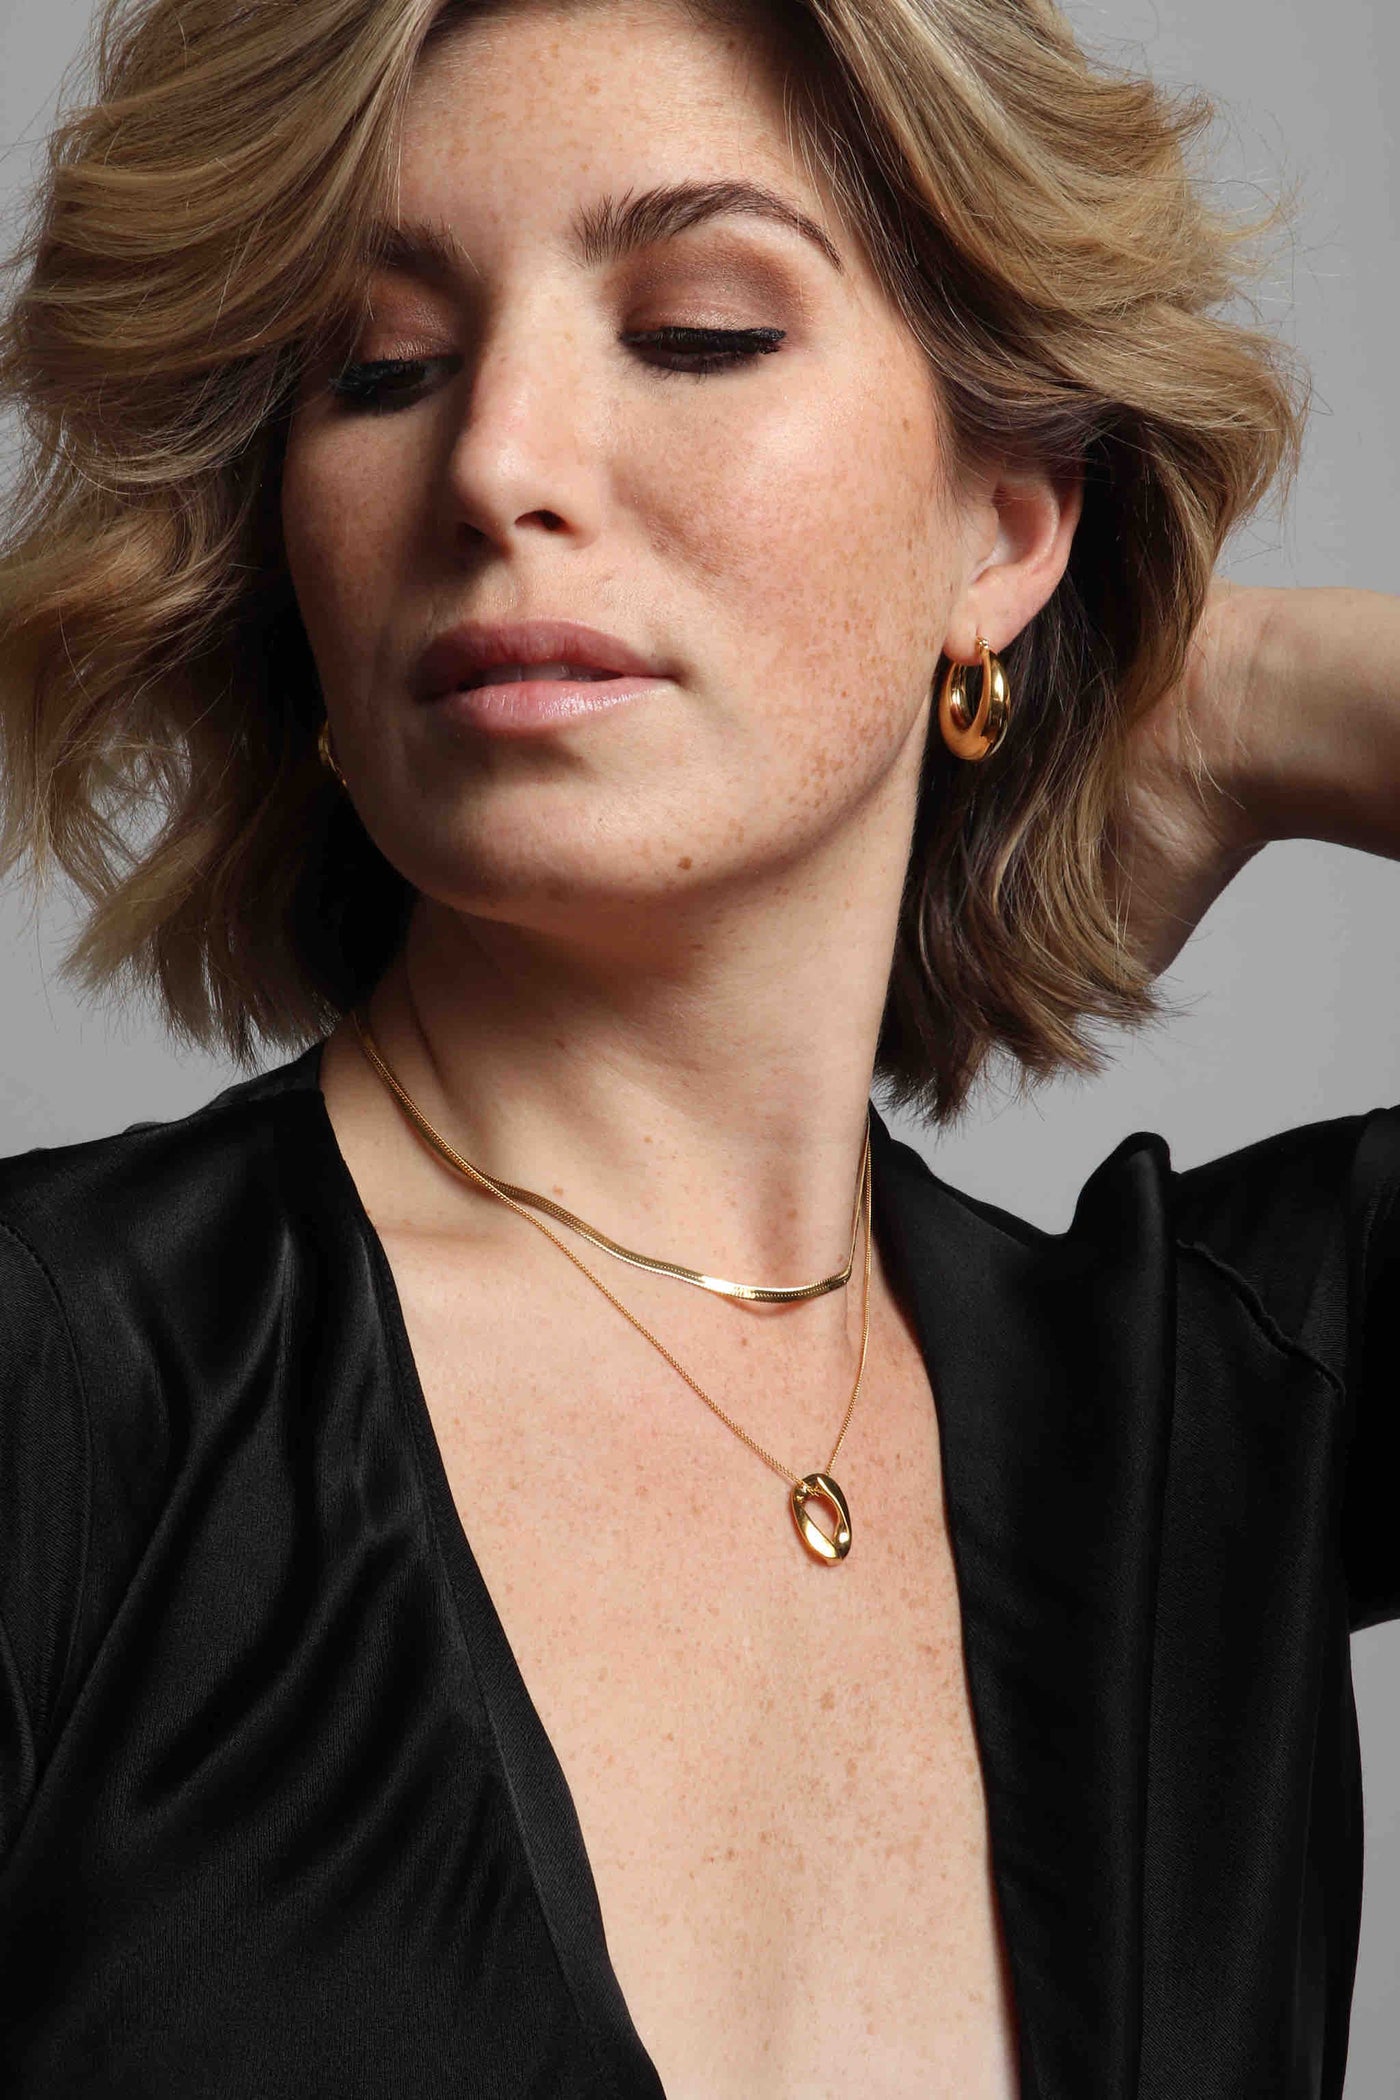 Delicate 14k gold plated stainless steel jewelry by Marrin Costello, featuring our click hoop round Layla Hoops, vintage inspired herringbone Ramsey Choker in 3mm width, and Cuban Link Queens Pendant on a delicate curb link chain, styled with a vintage black silk wrap dress 